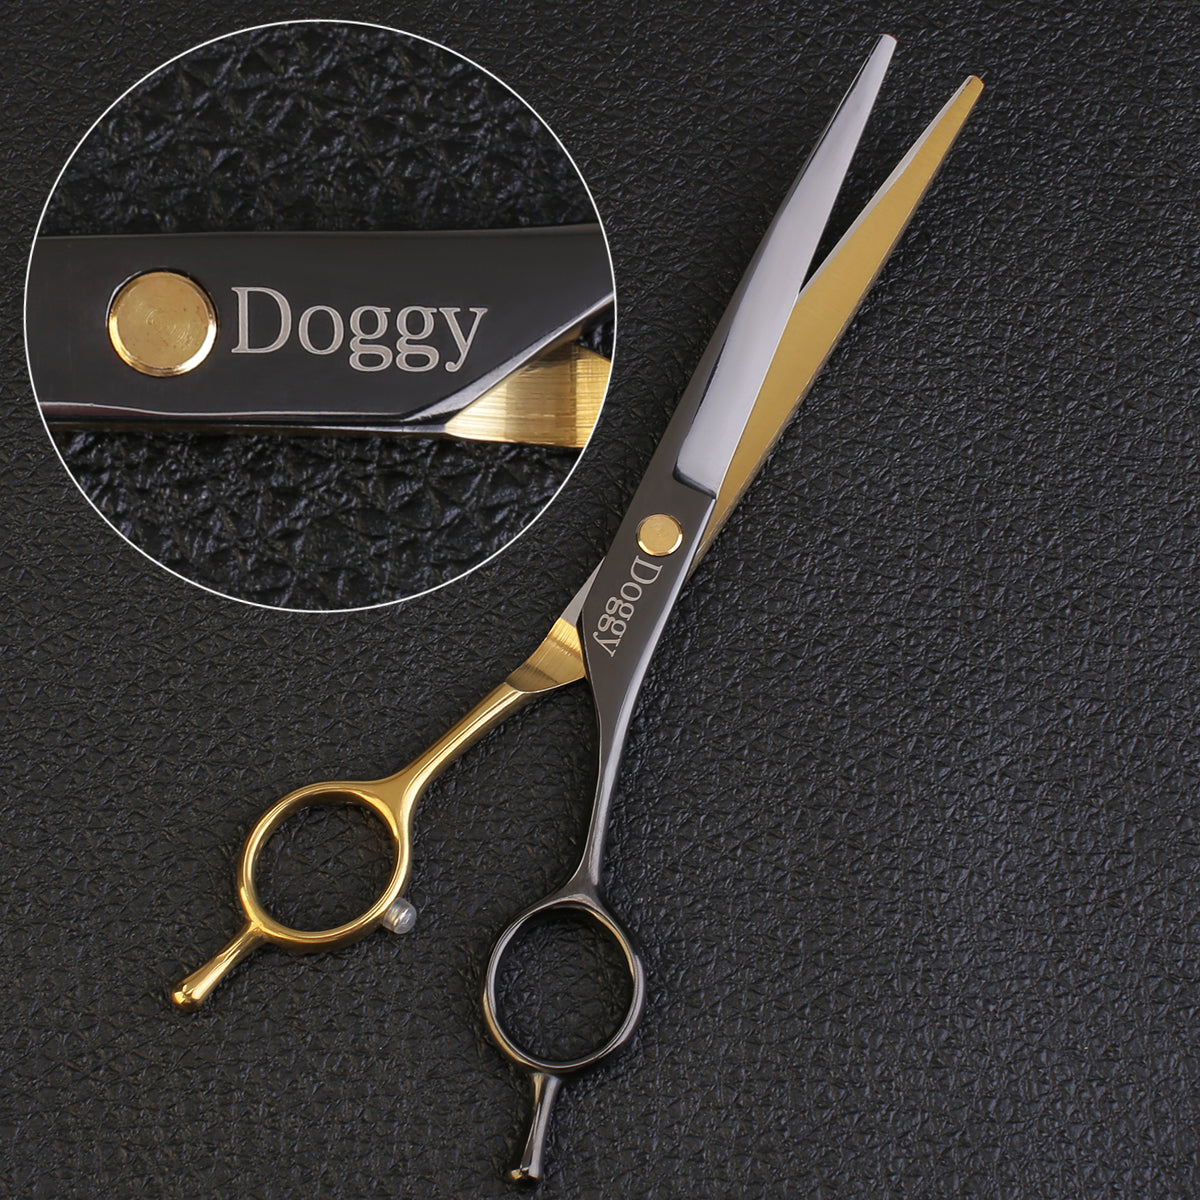 Custom Super Curved Shears Of Grooming Equipment Kit For Dogs DC010